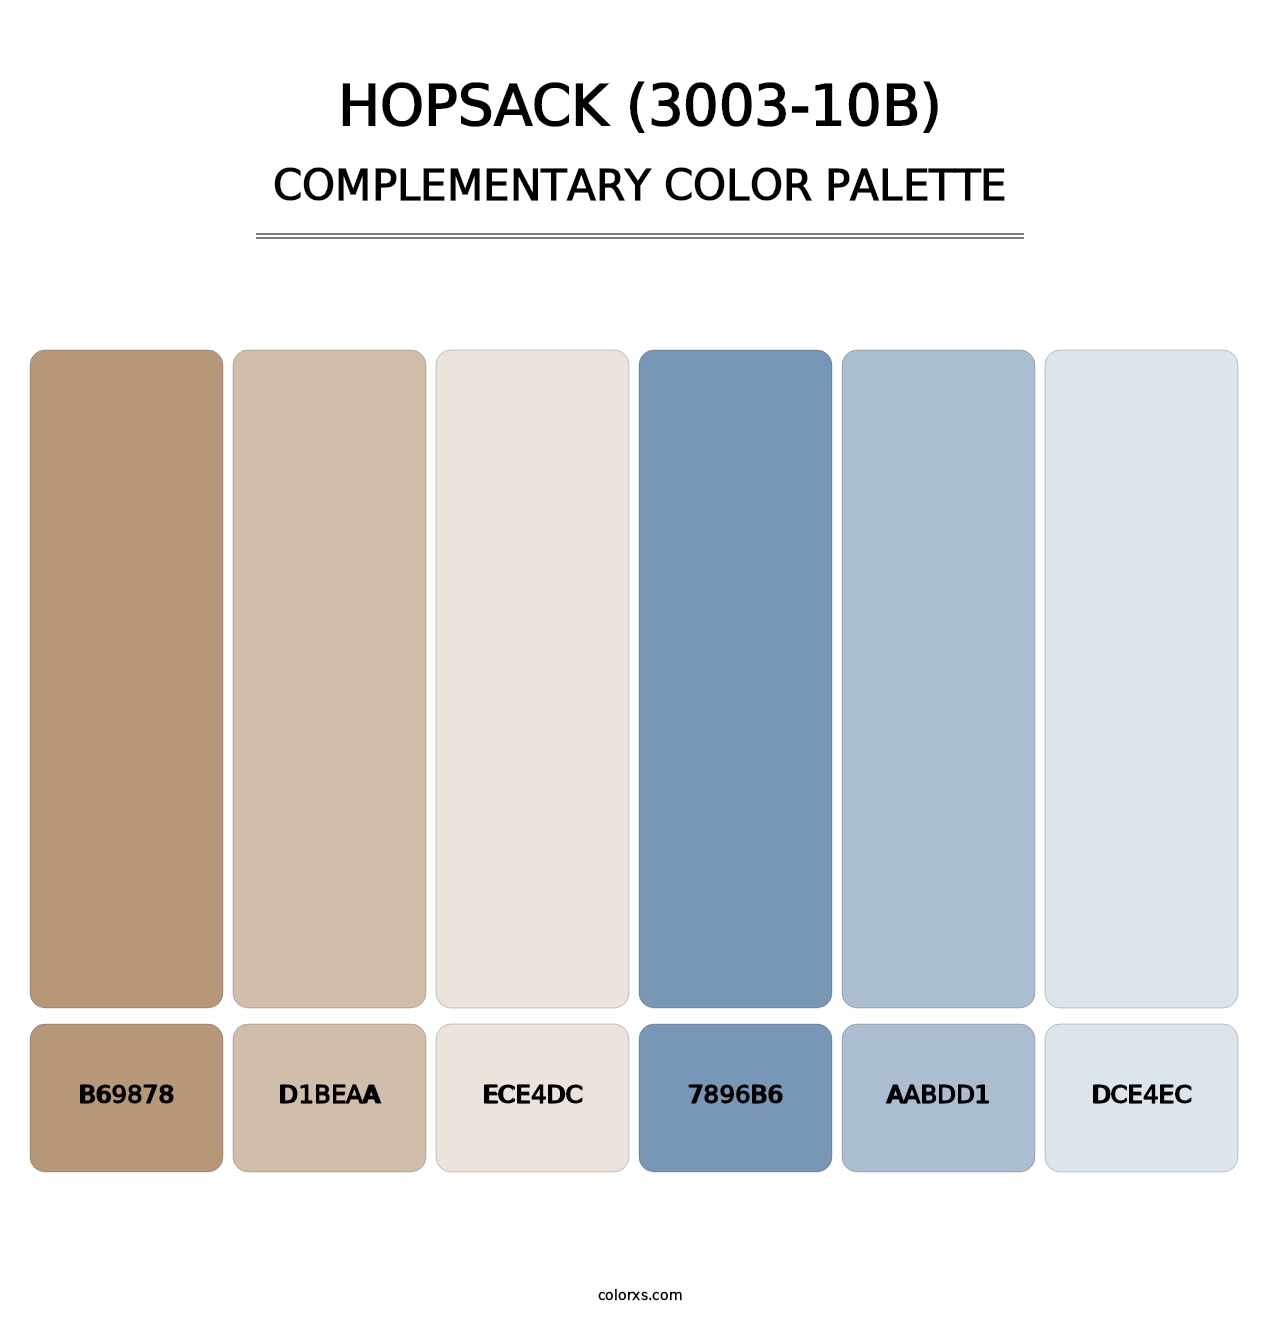 Hopsack (3003-10B) - Complementary Color Palette